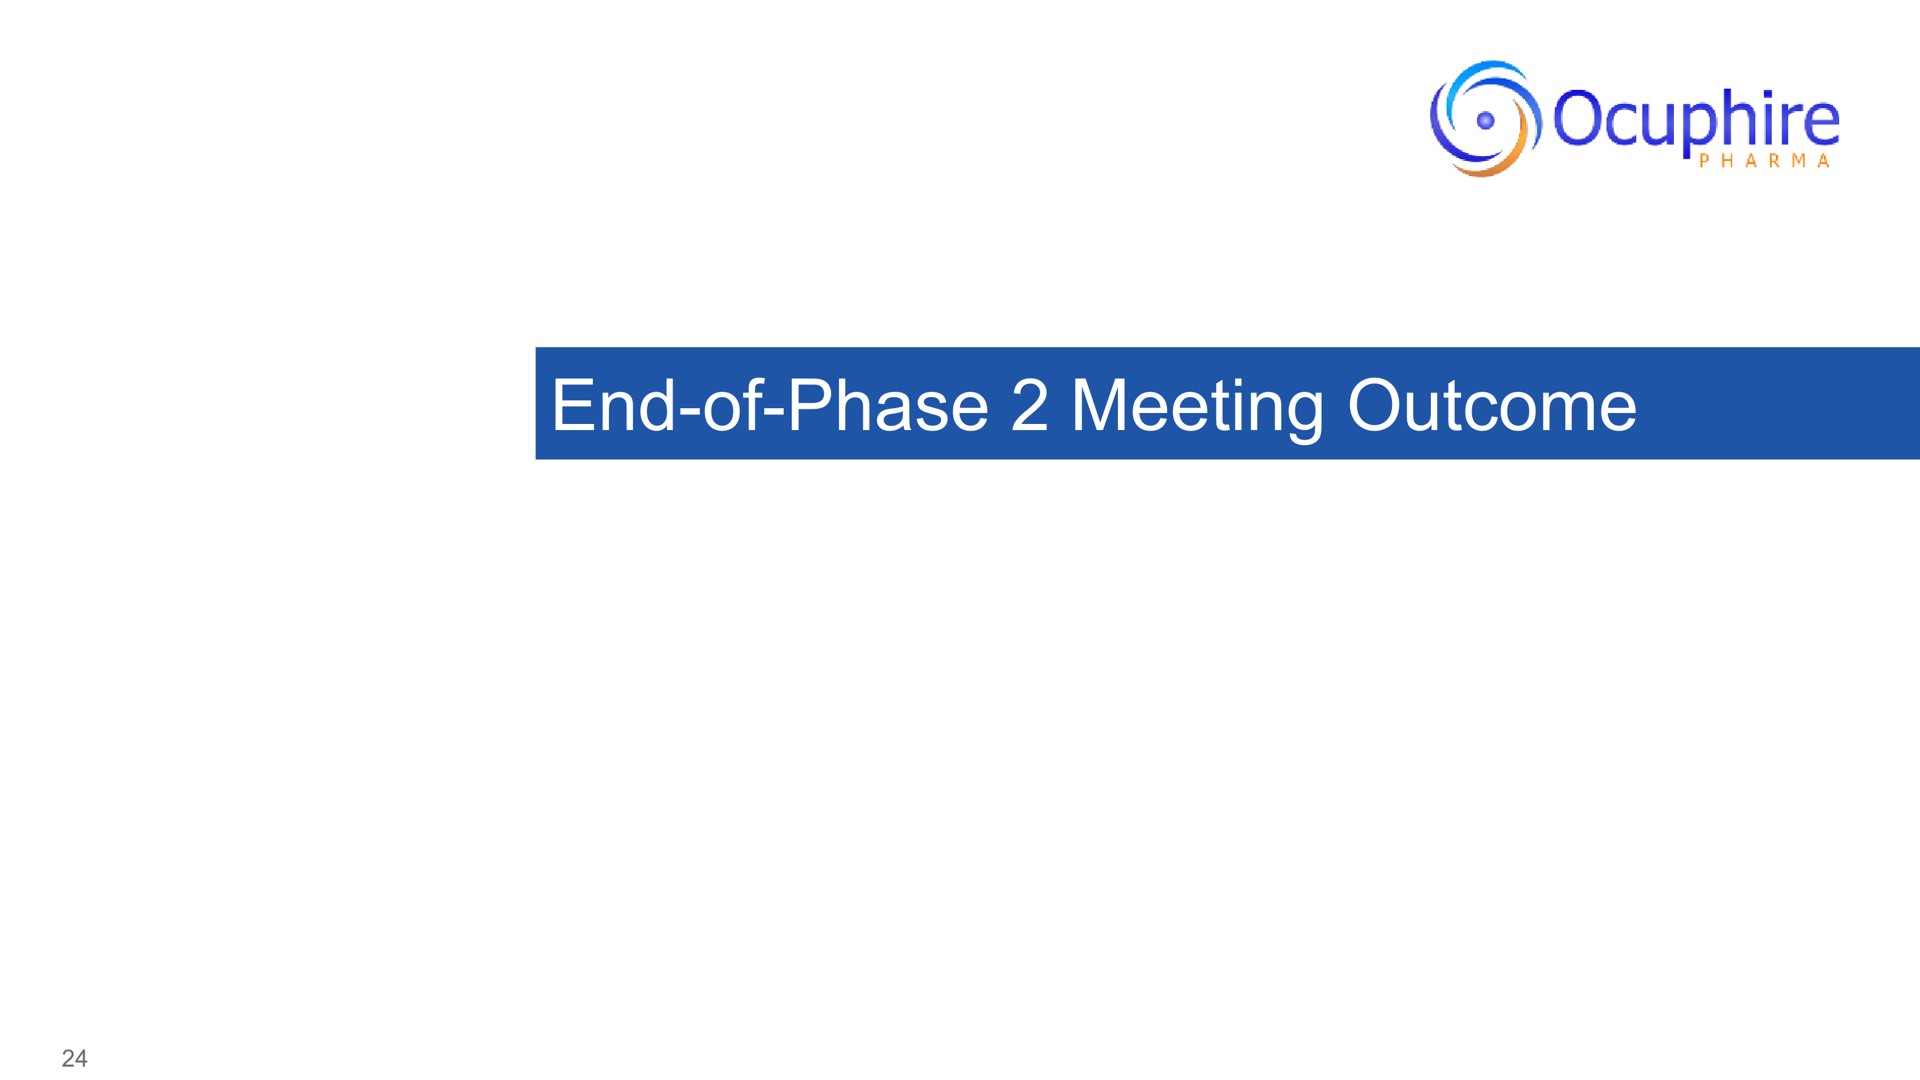 end of phase meeting outcome | Ocuphire Pharma